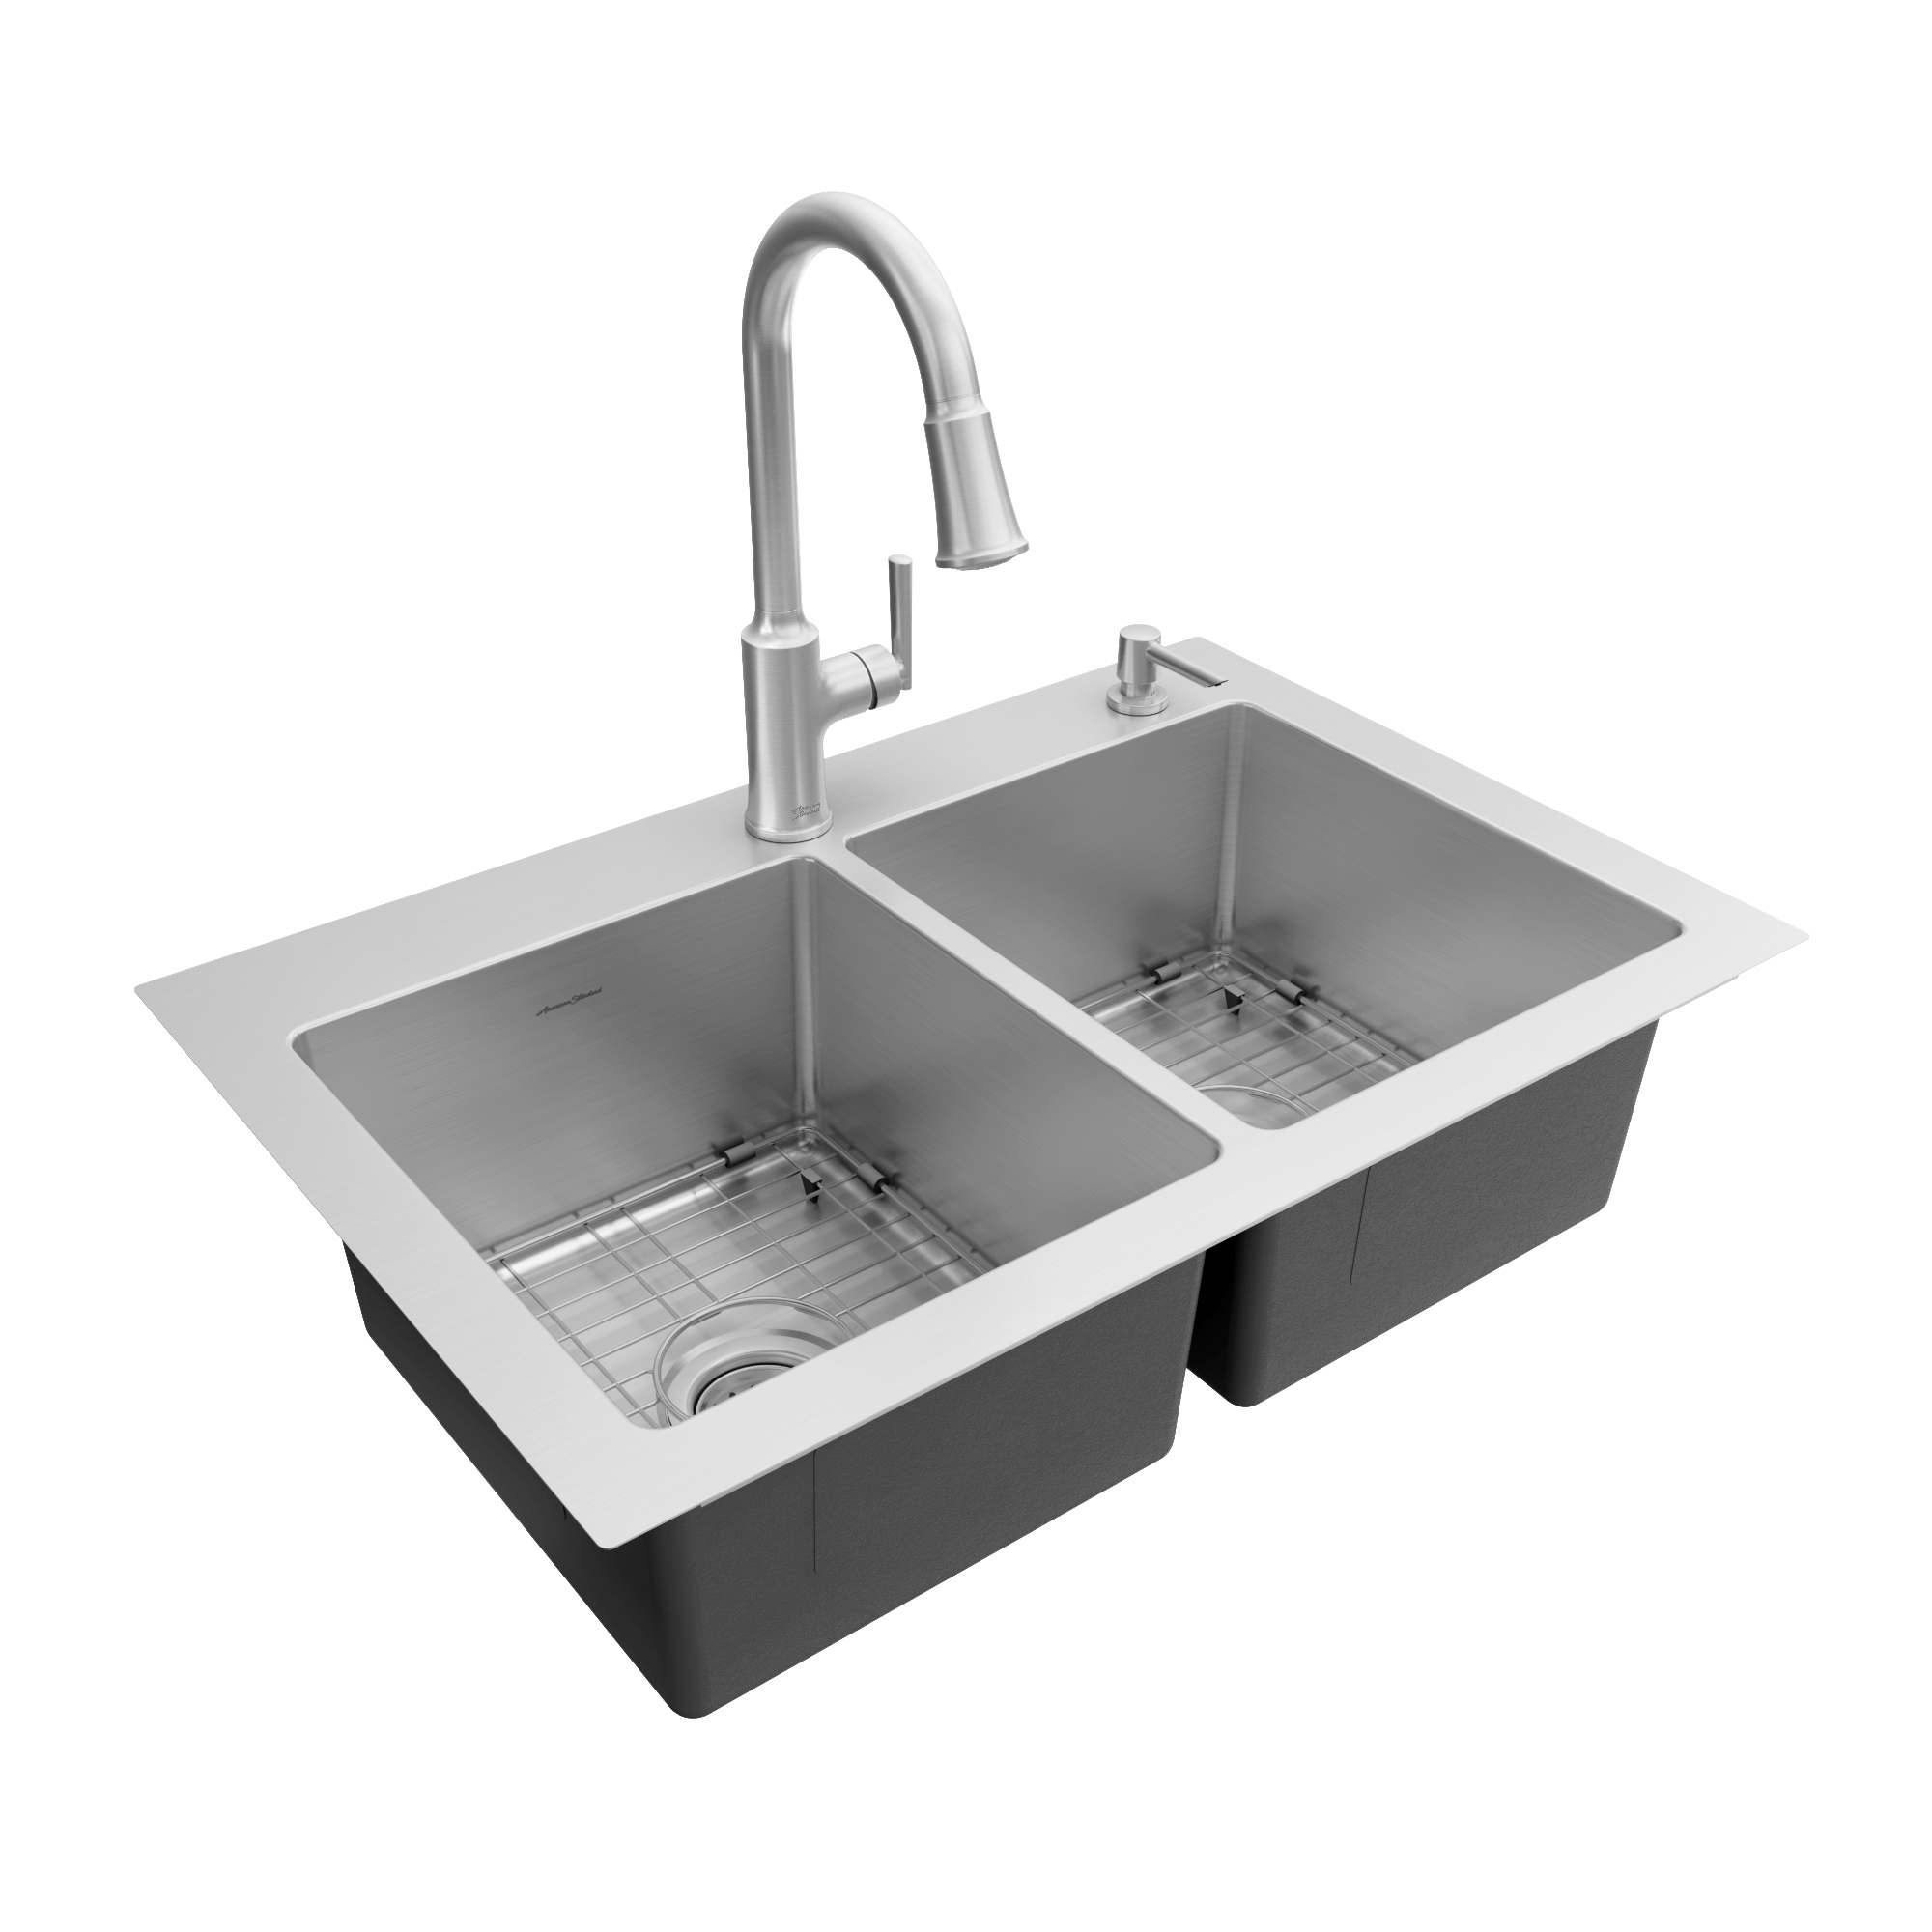 Shop American Standard Danville Stainless Steel Single Bowl Kitchen Sink  Collection at